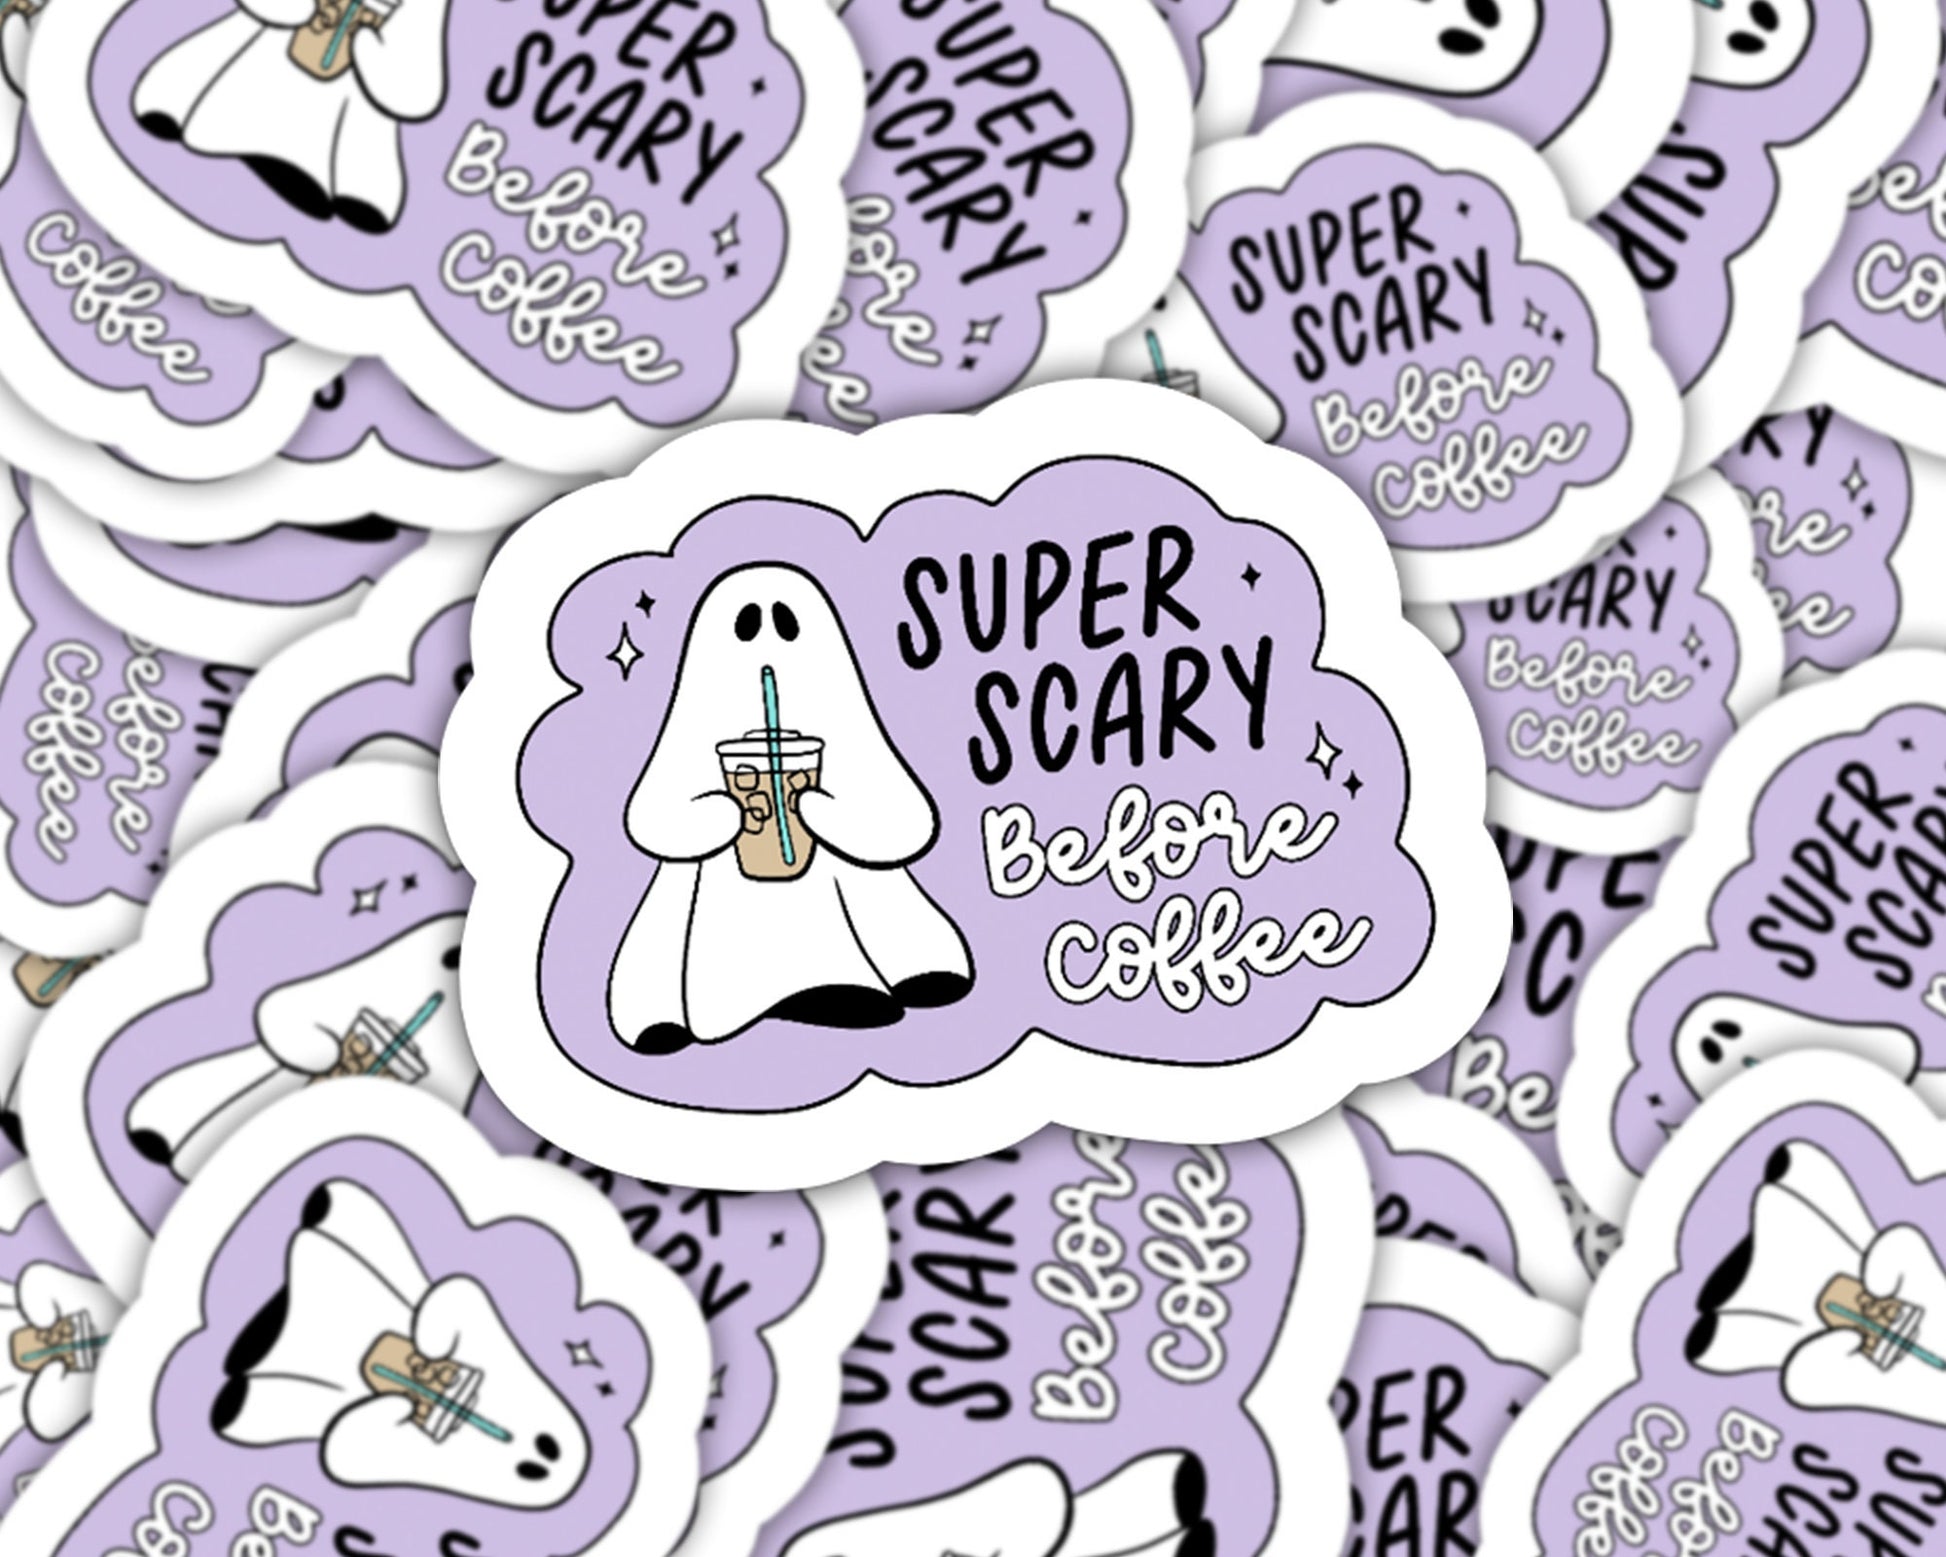 super scary before coffee sticker, coffee sticker, coffee lover, barista stickers, coffee cup, iced coffee sticker, coffee love sticker